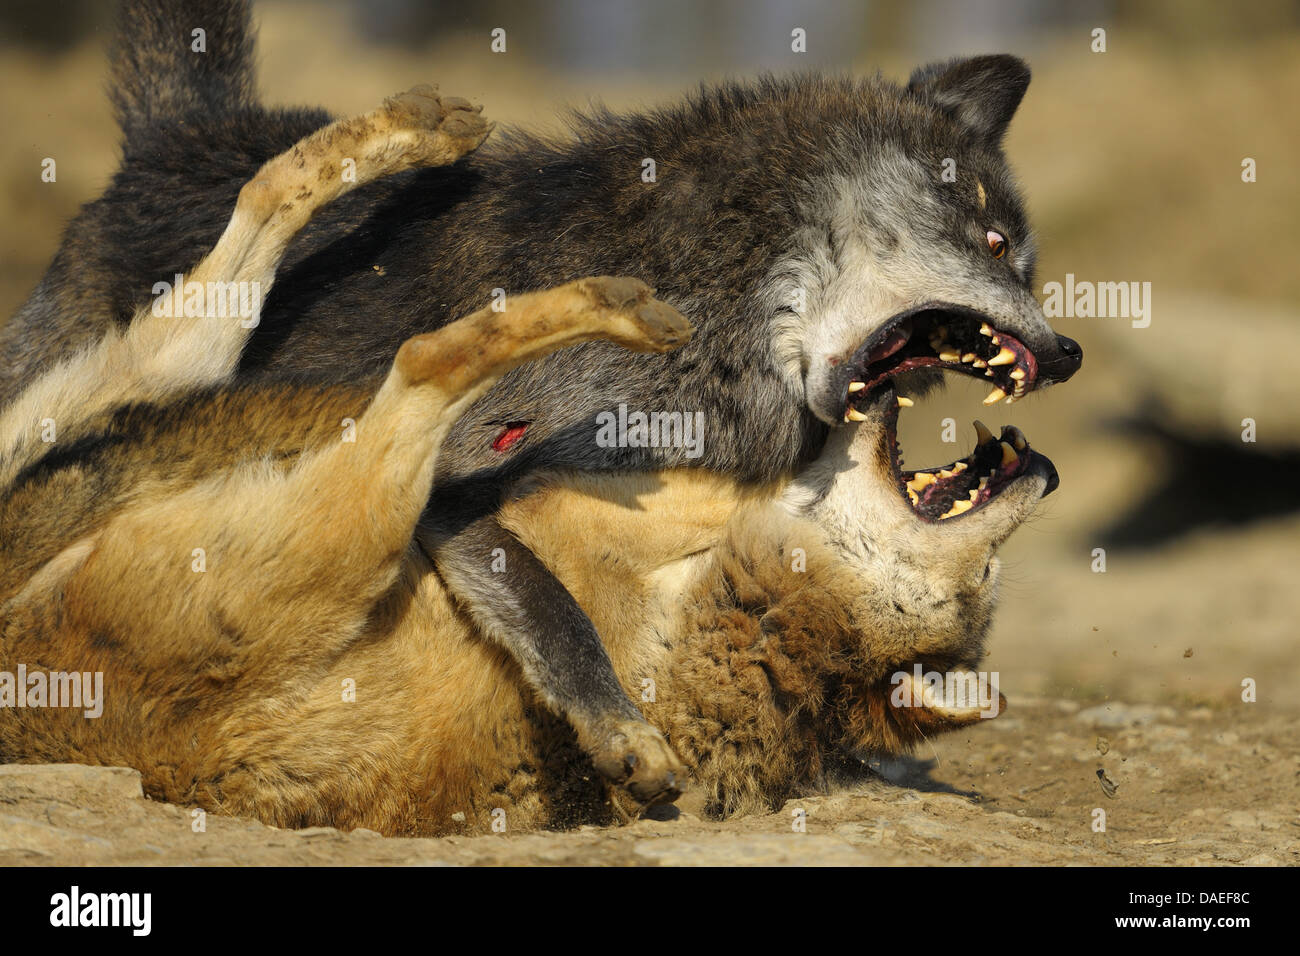 European gray wolf (Canis lupus lupus), Wolves Battle in the Mating Period, Germany Stock Photo